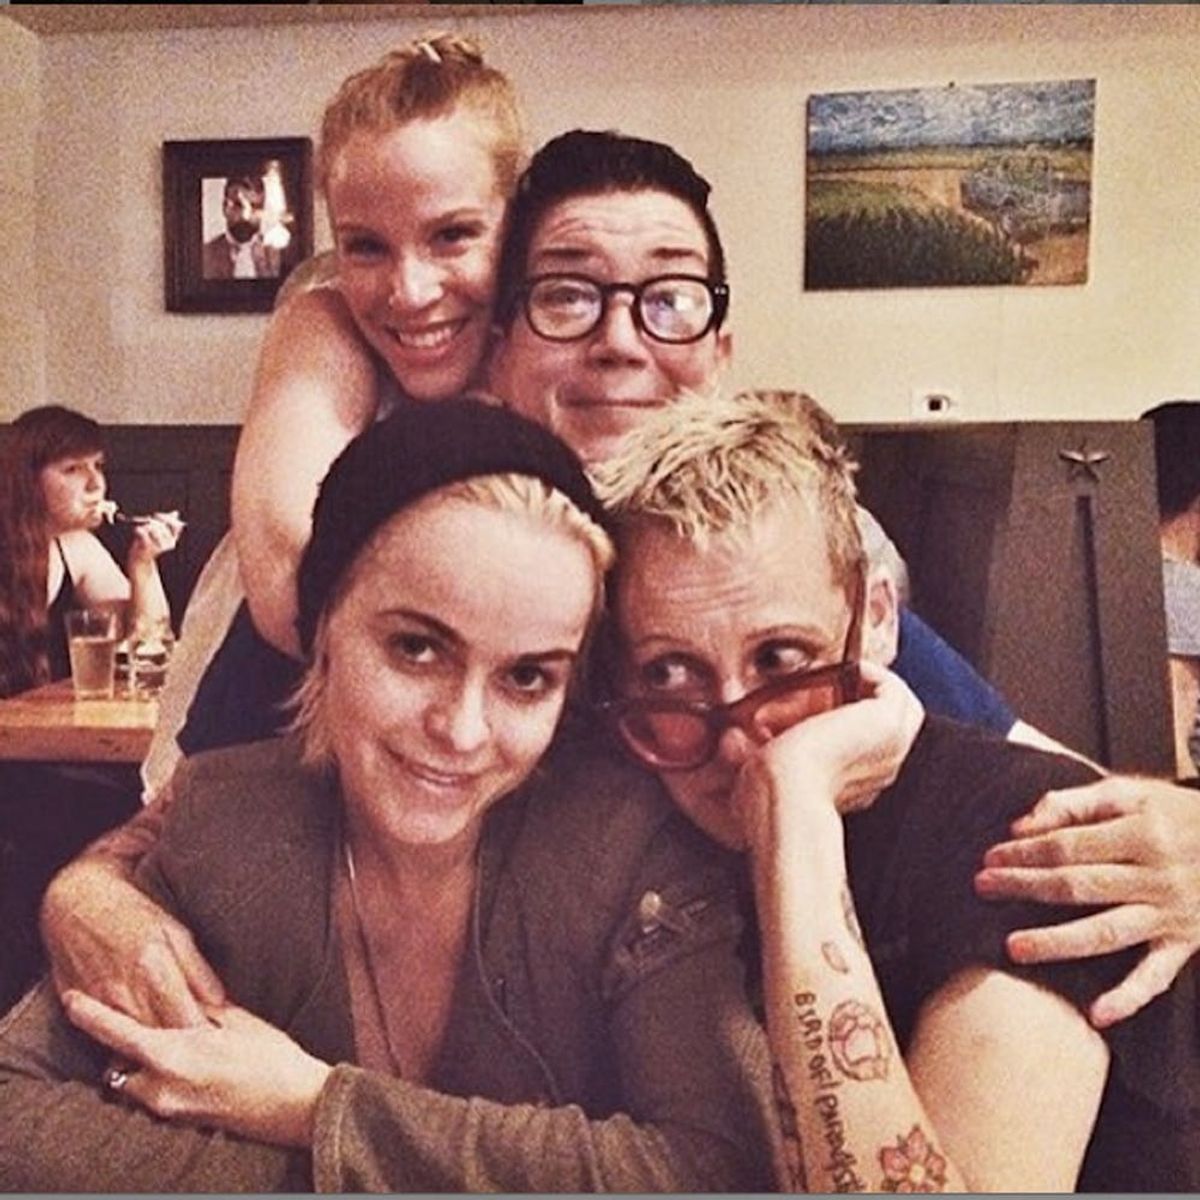 These Behind-the-Scenes Instagram Pics Will Get You Excited For OITNB Season 4